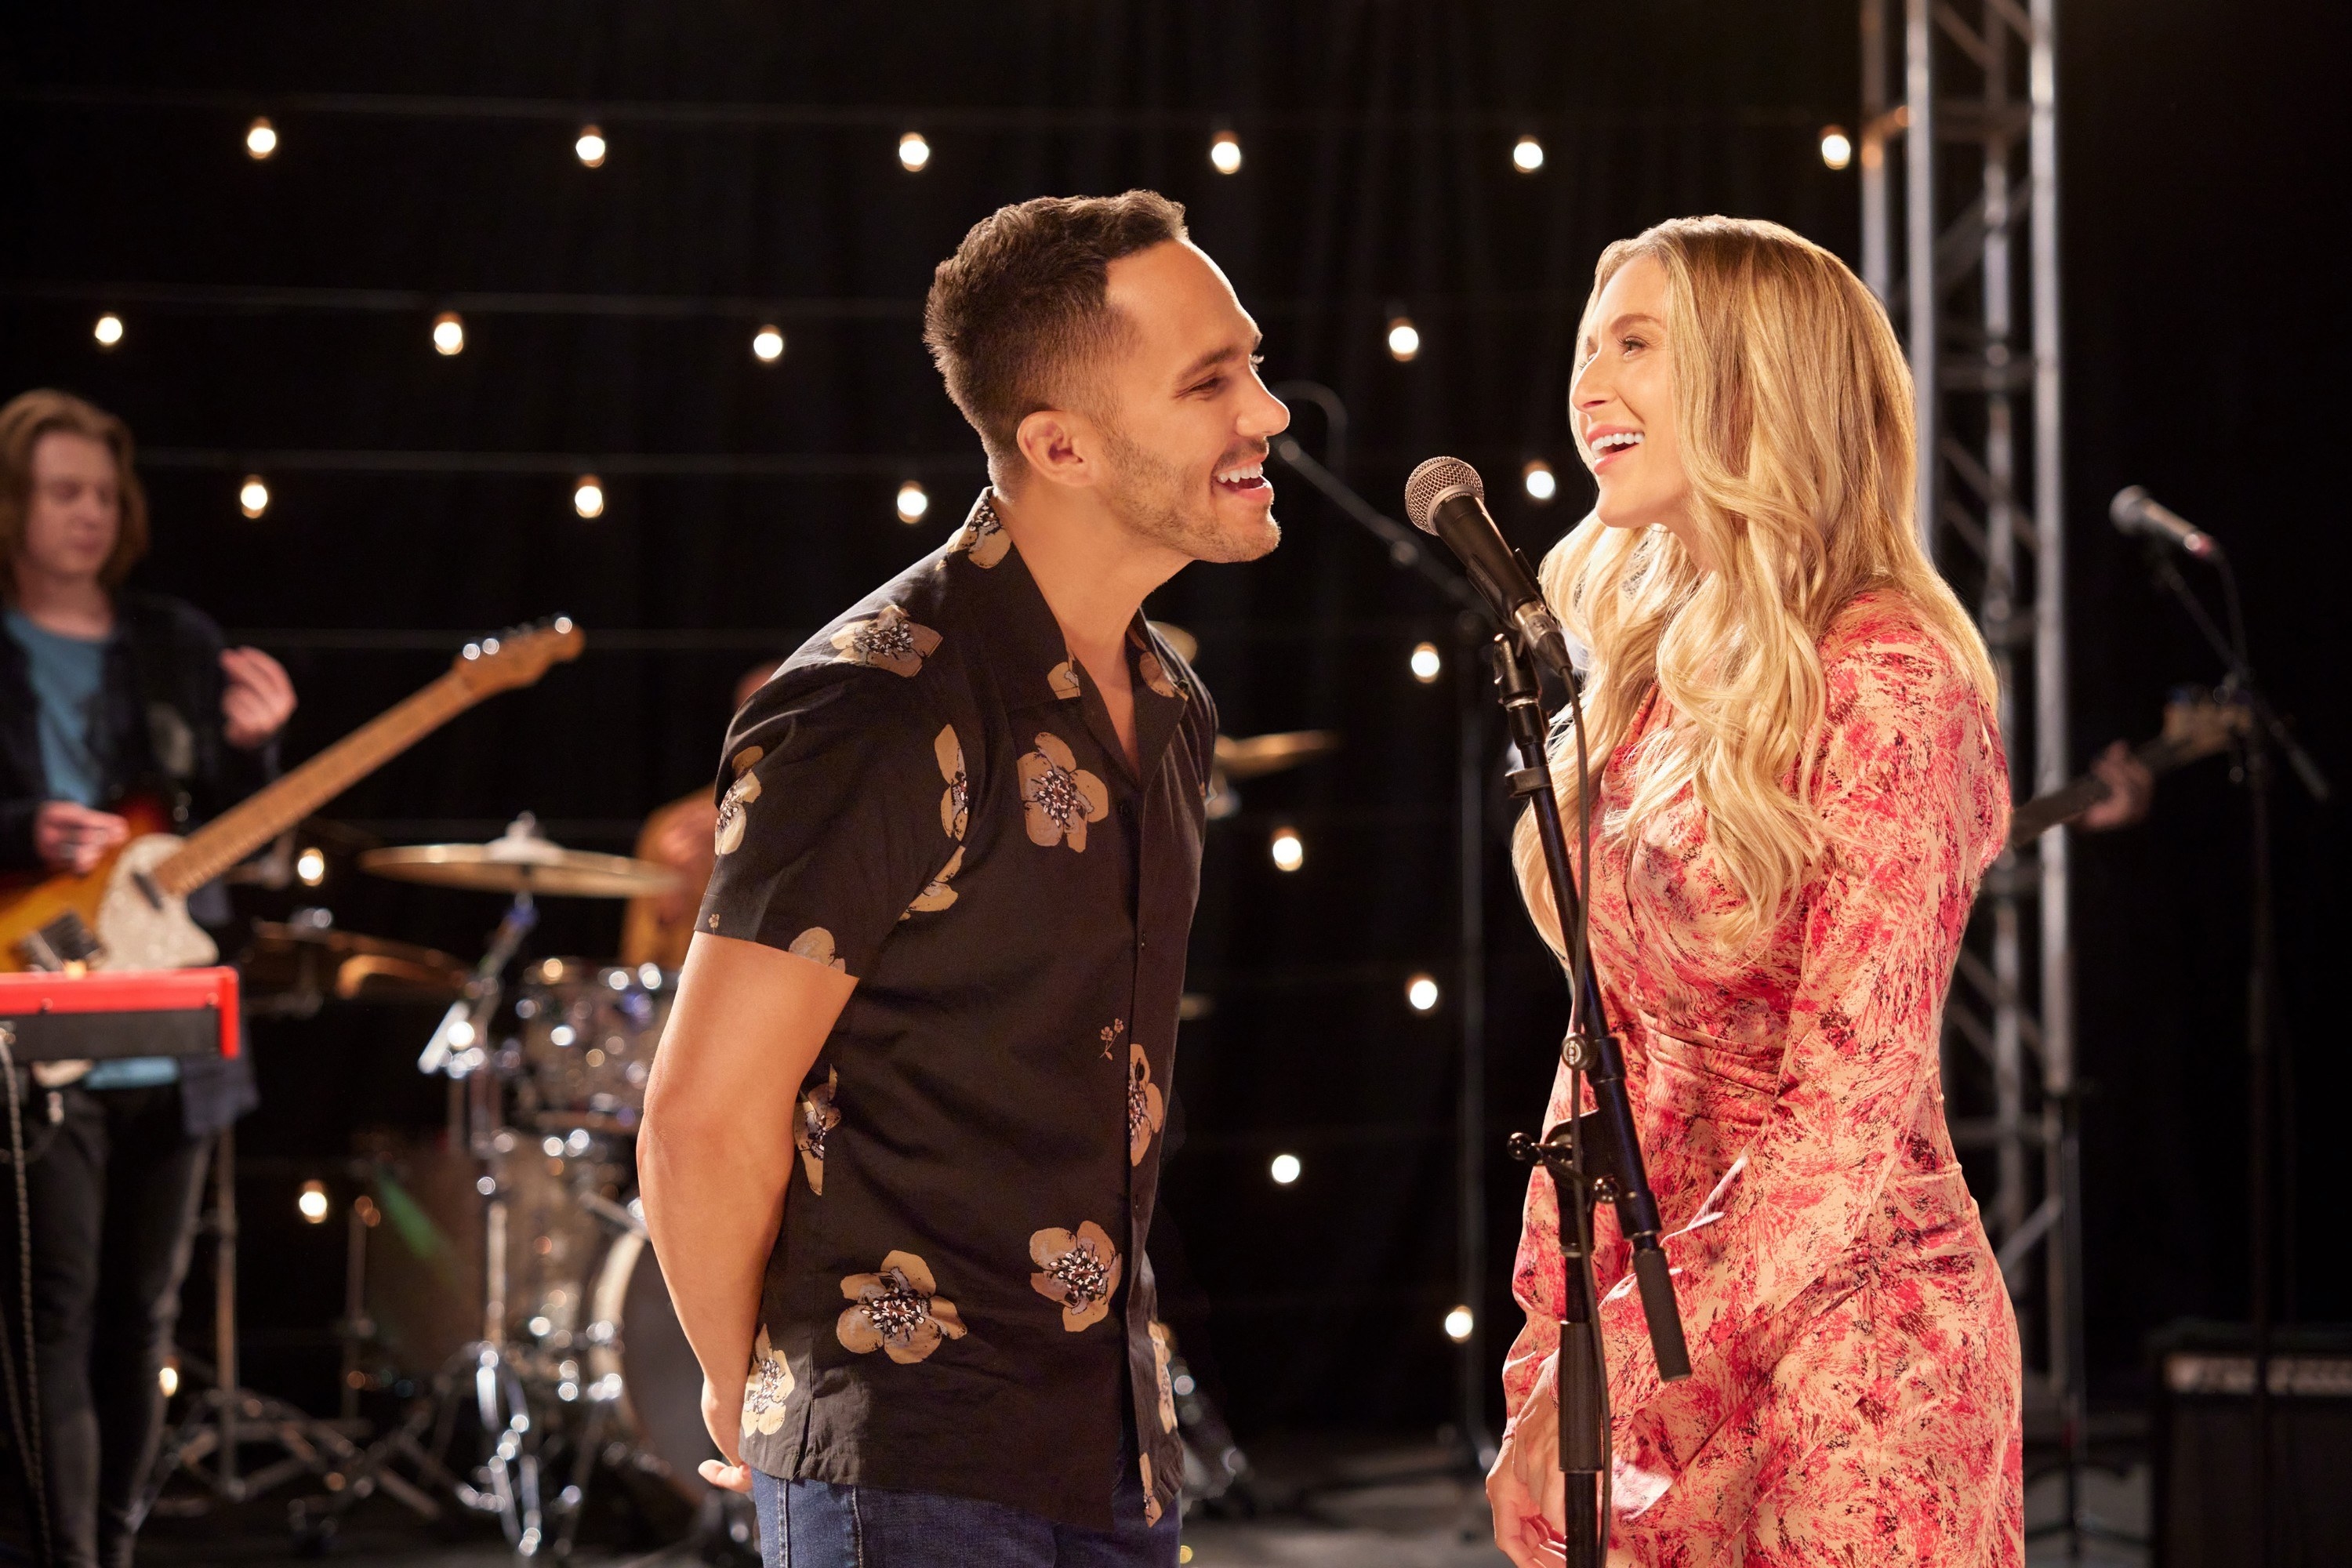 Carlos and Alexa onstage at a microphone together